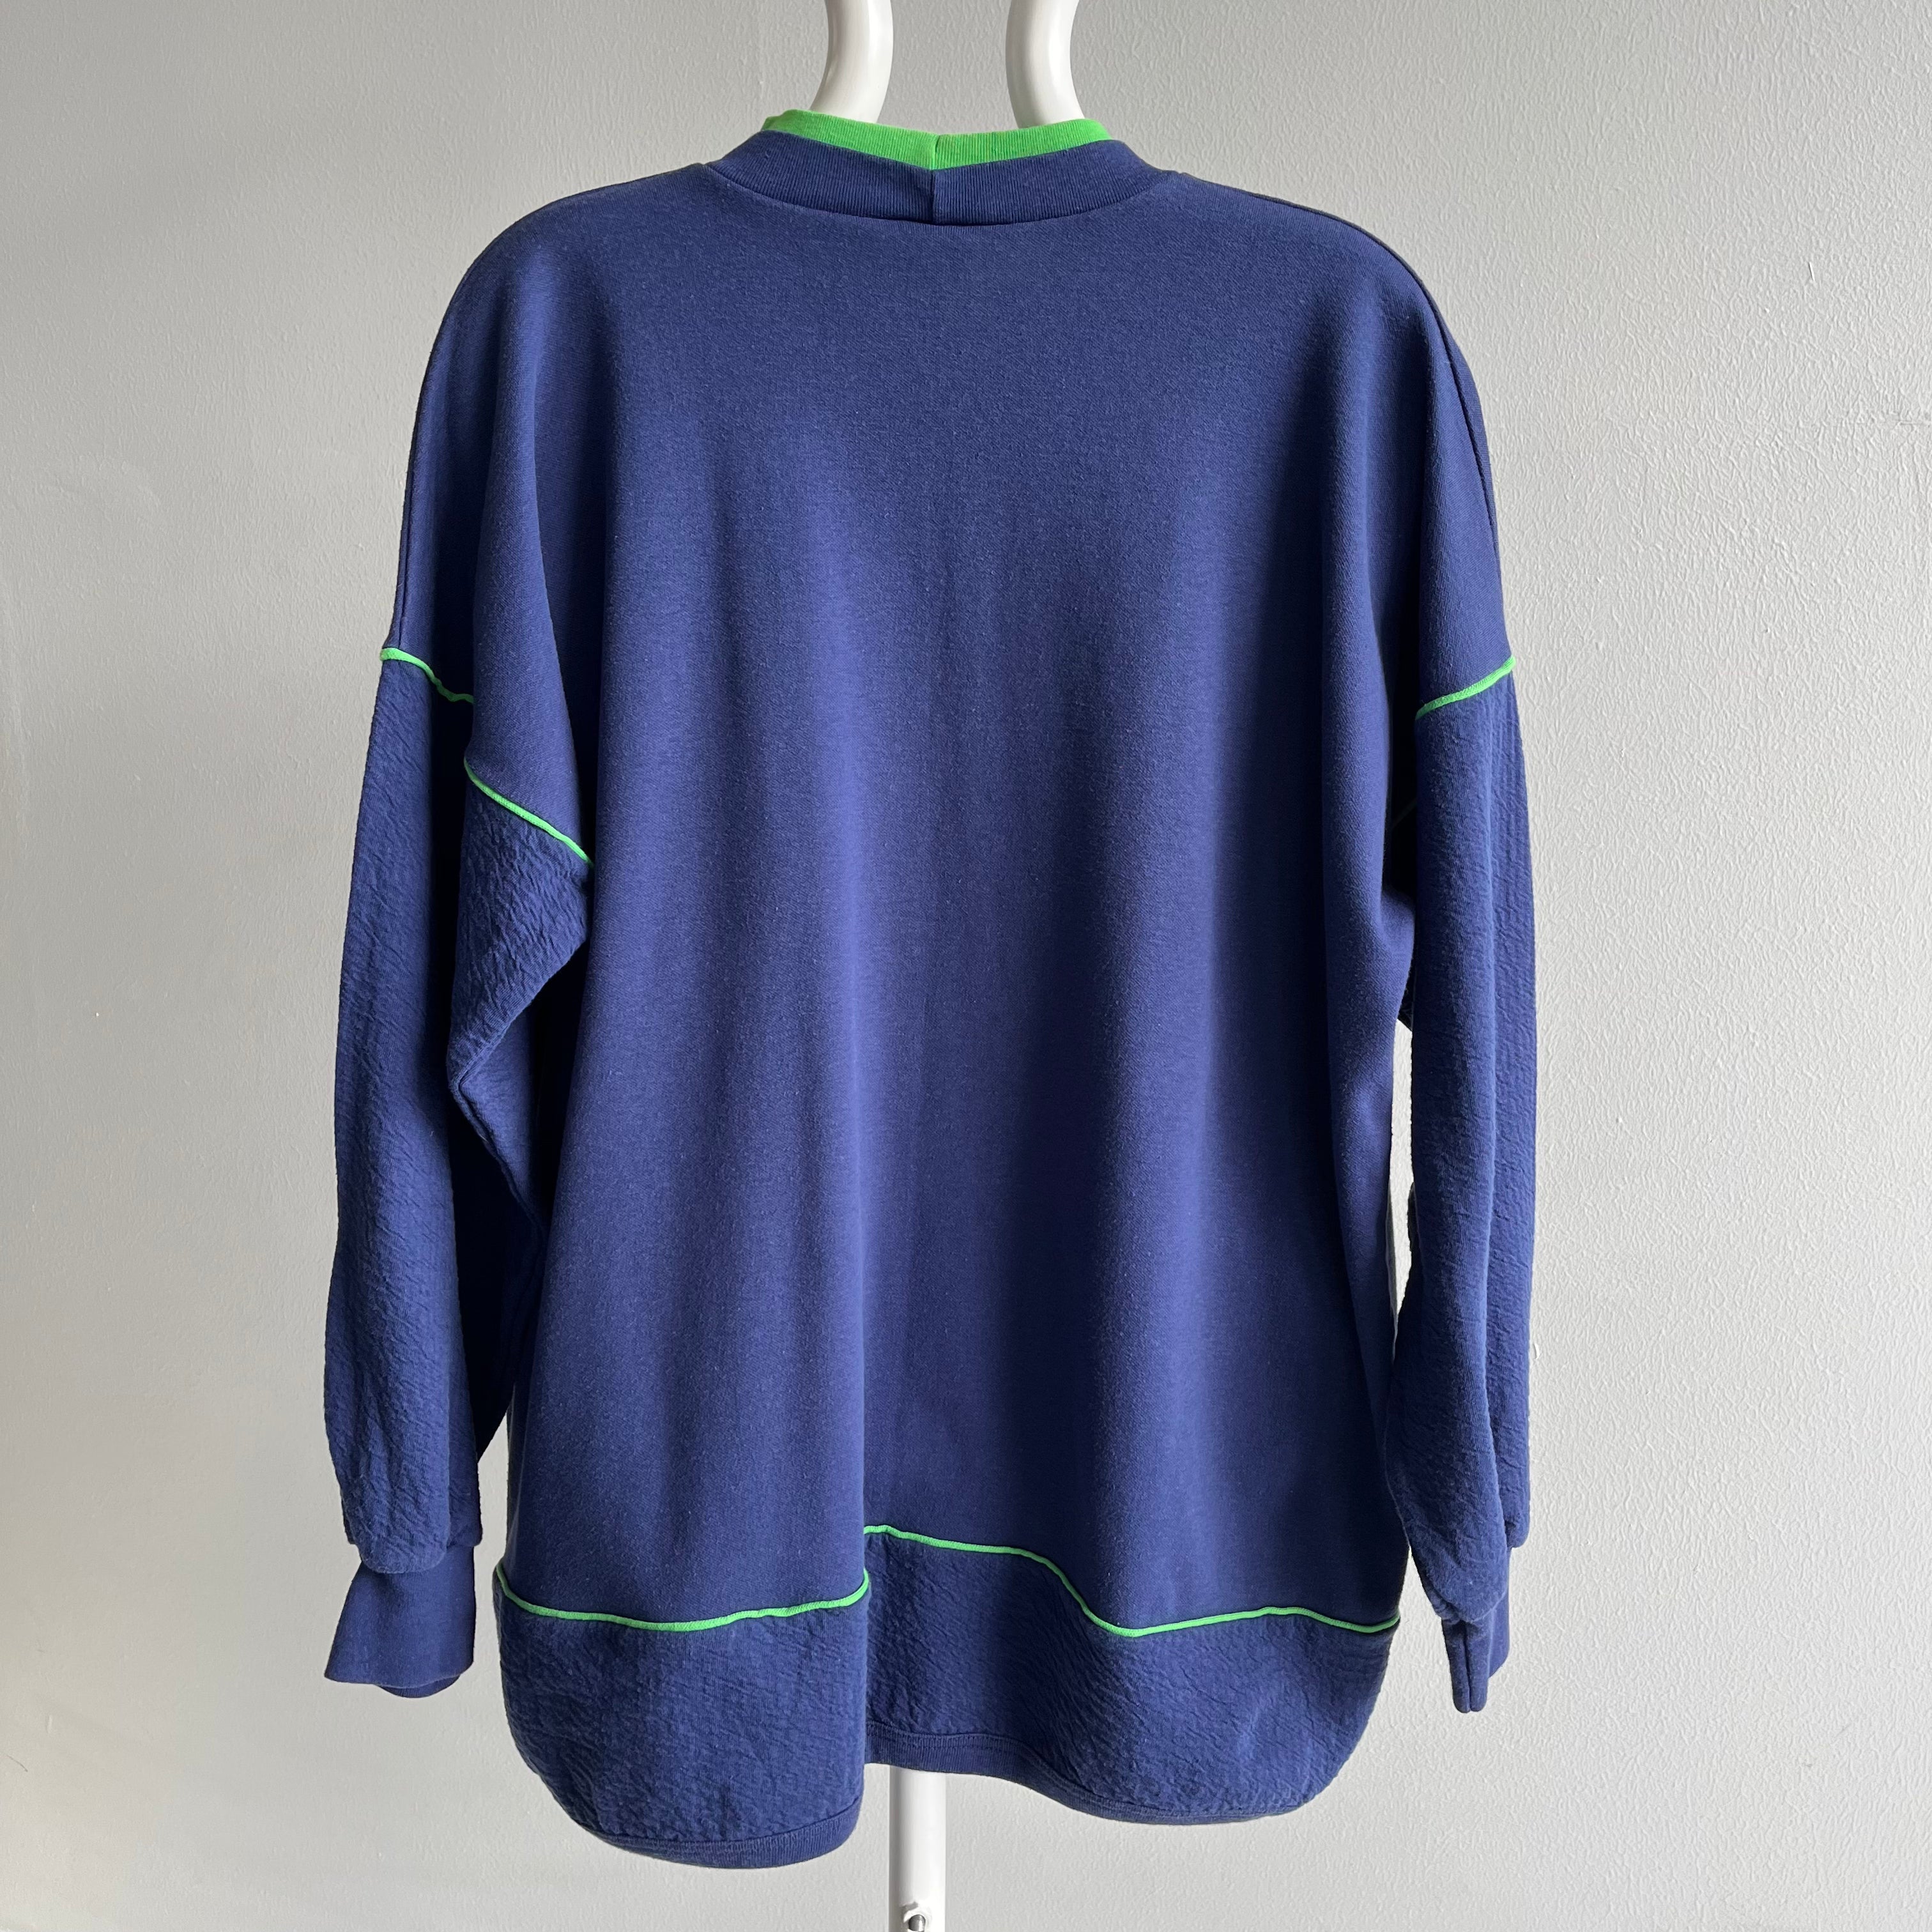 1980/90s Two Tone Very Special In A 90s PTA Team-Mom Sort Of Way Sweatshirt